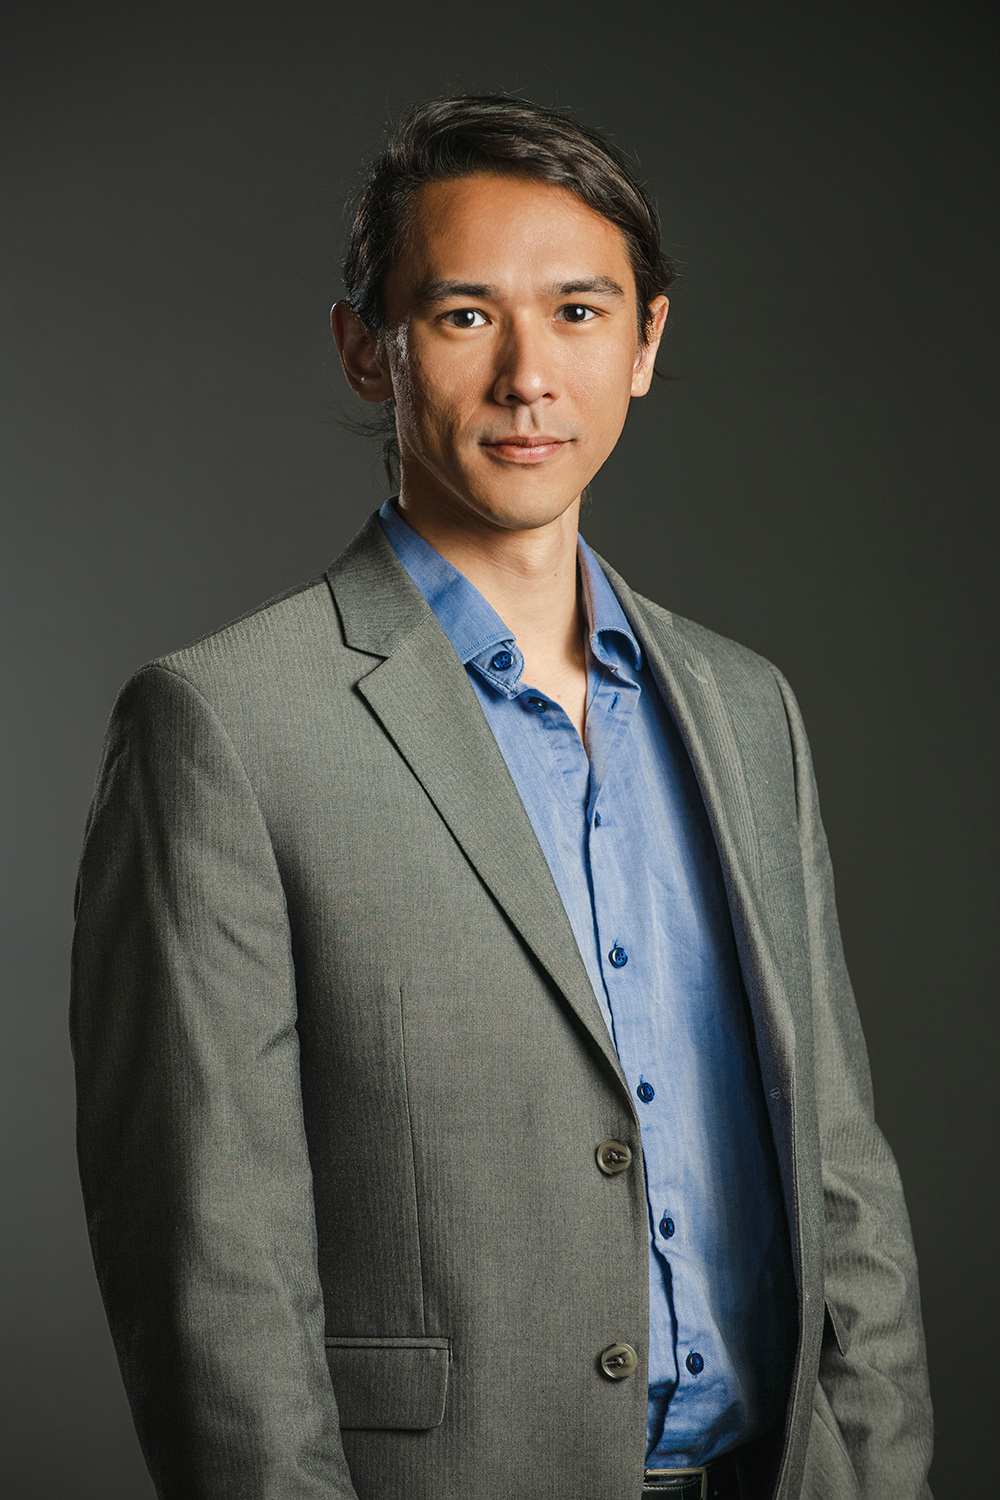 Color photograph of an Asian man wearing a blue shirt and blazer looking at the camera